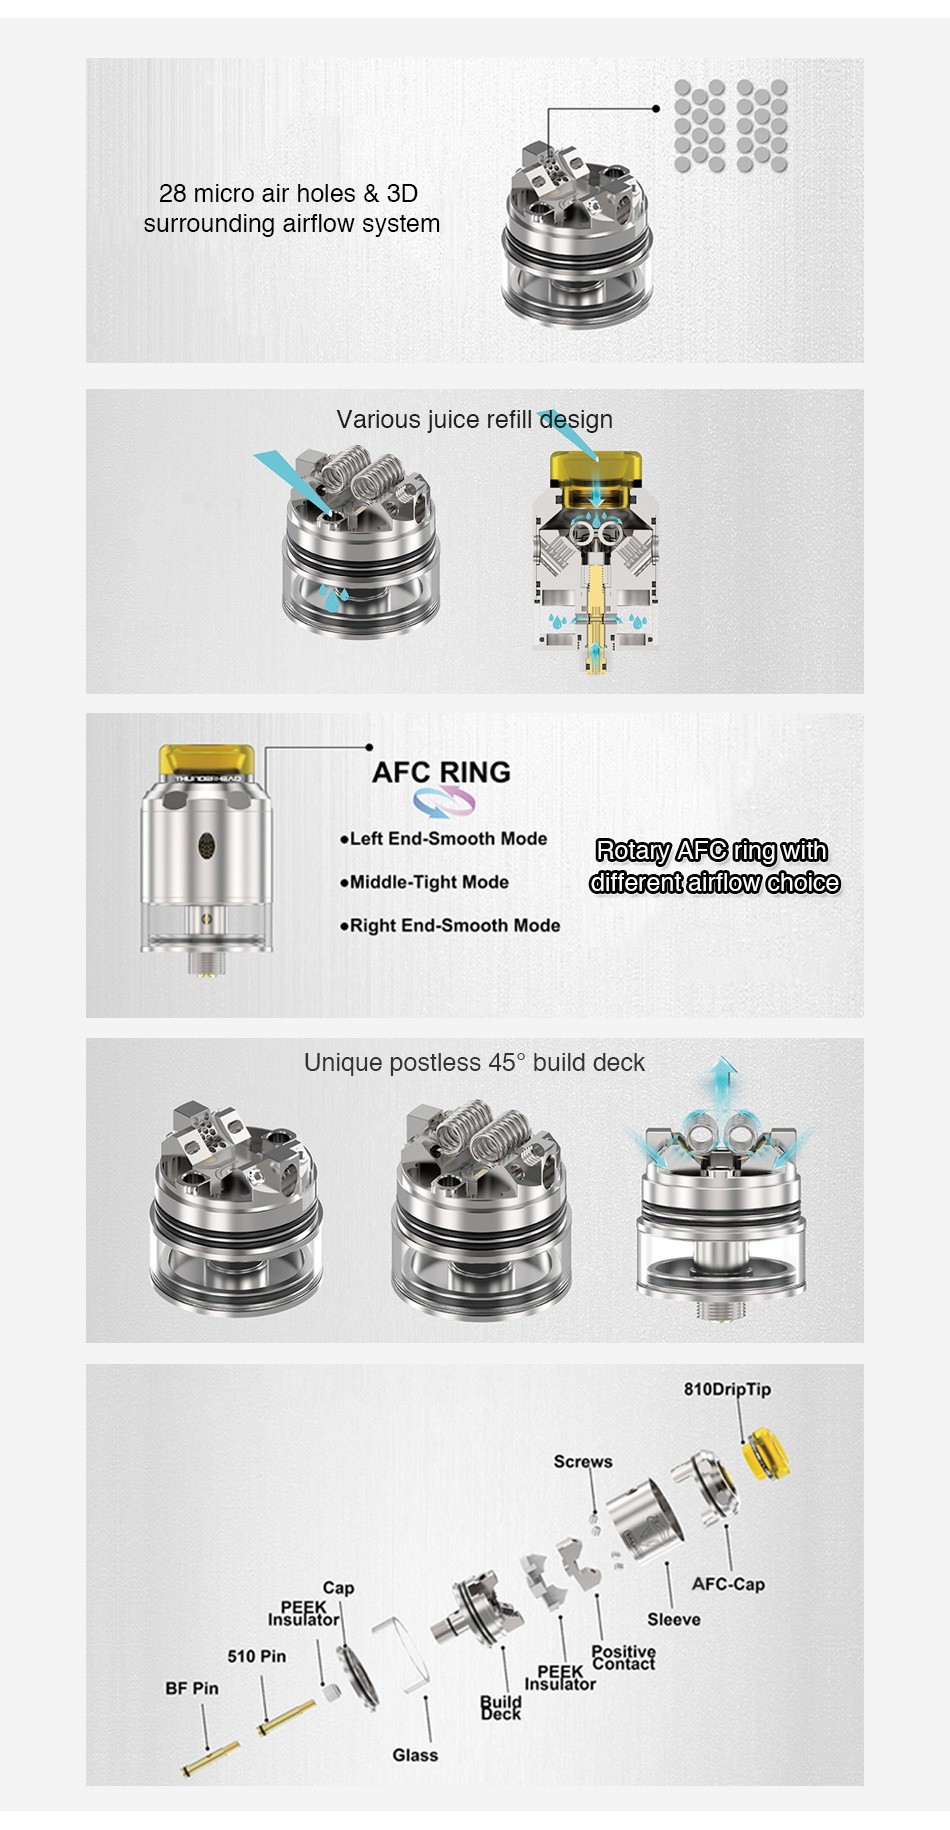 THC Tauren BF RDTA 2ml 28 micro air holes 3D surrounding airflow system Various juice refill design AFC RING   Left End  Smooth Mode Rotary AFC Cing with  Middle Tight Mode differentairflow choice   Right End Smooth Mode Unique postless 45 build deck 810DripT Scr Cap AFC Cap Sleeve 510 Pin BF Pin Buck